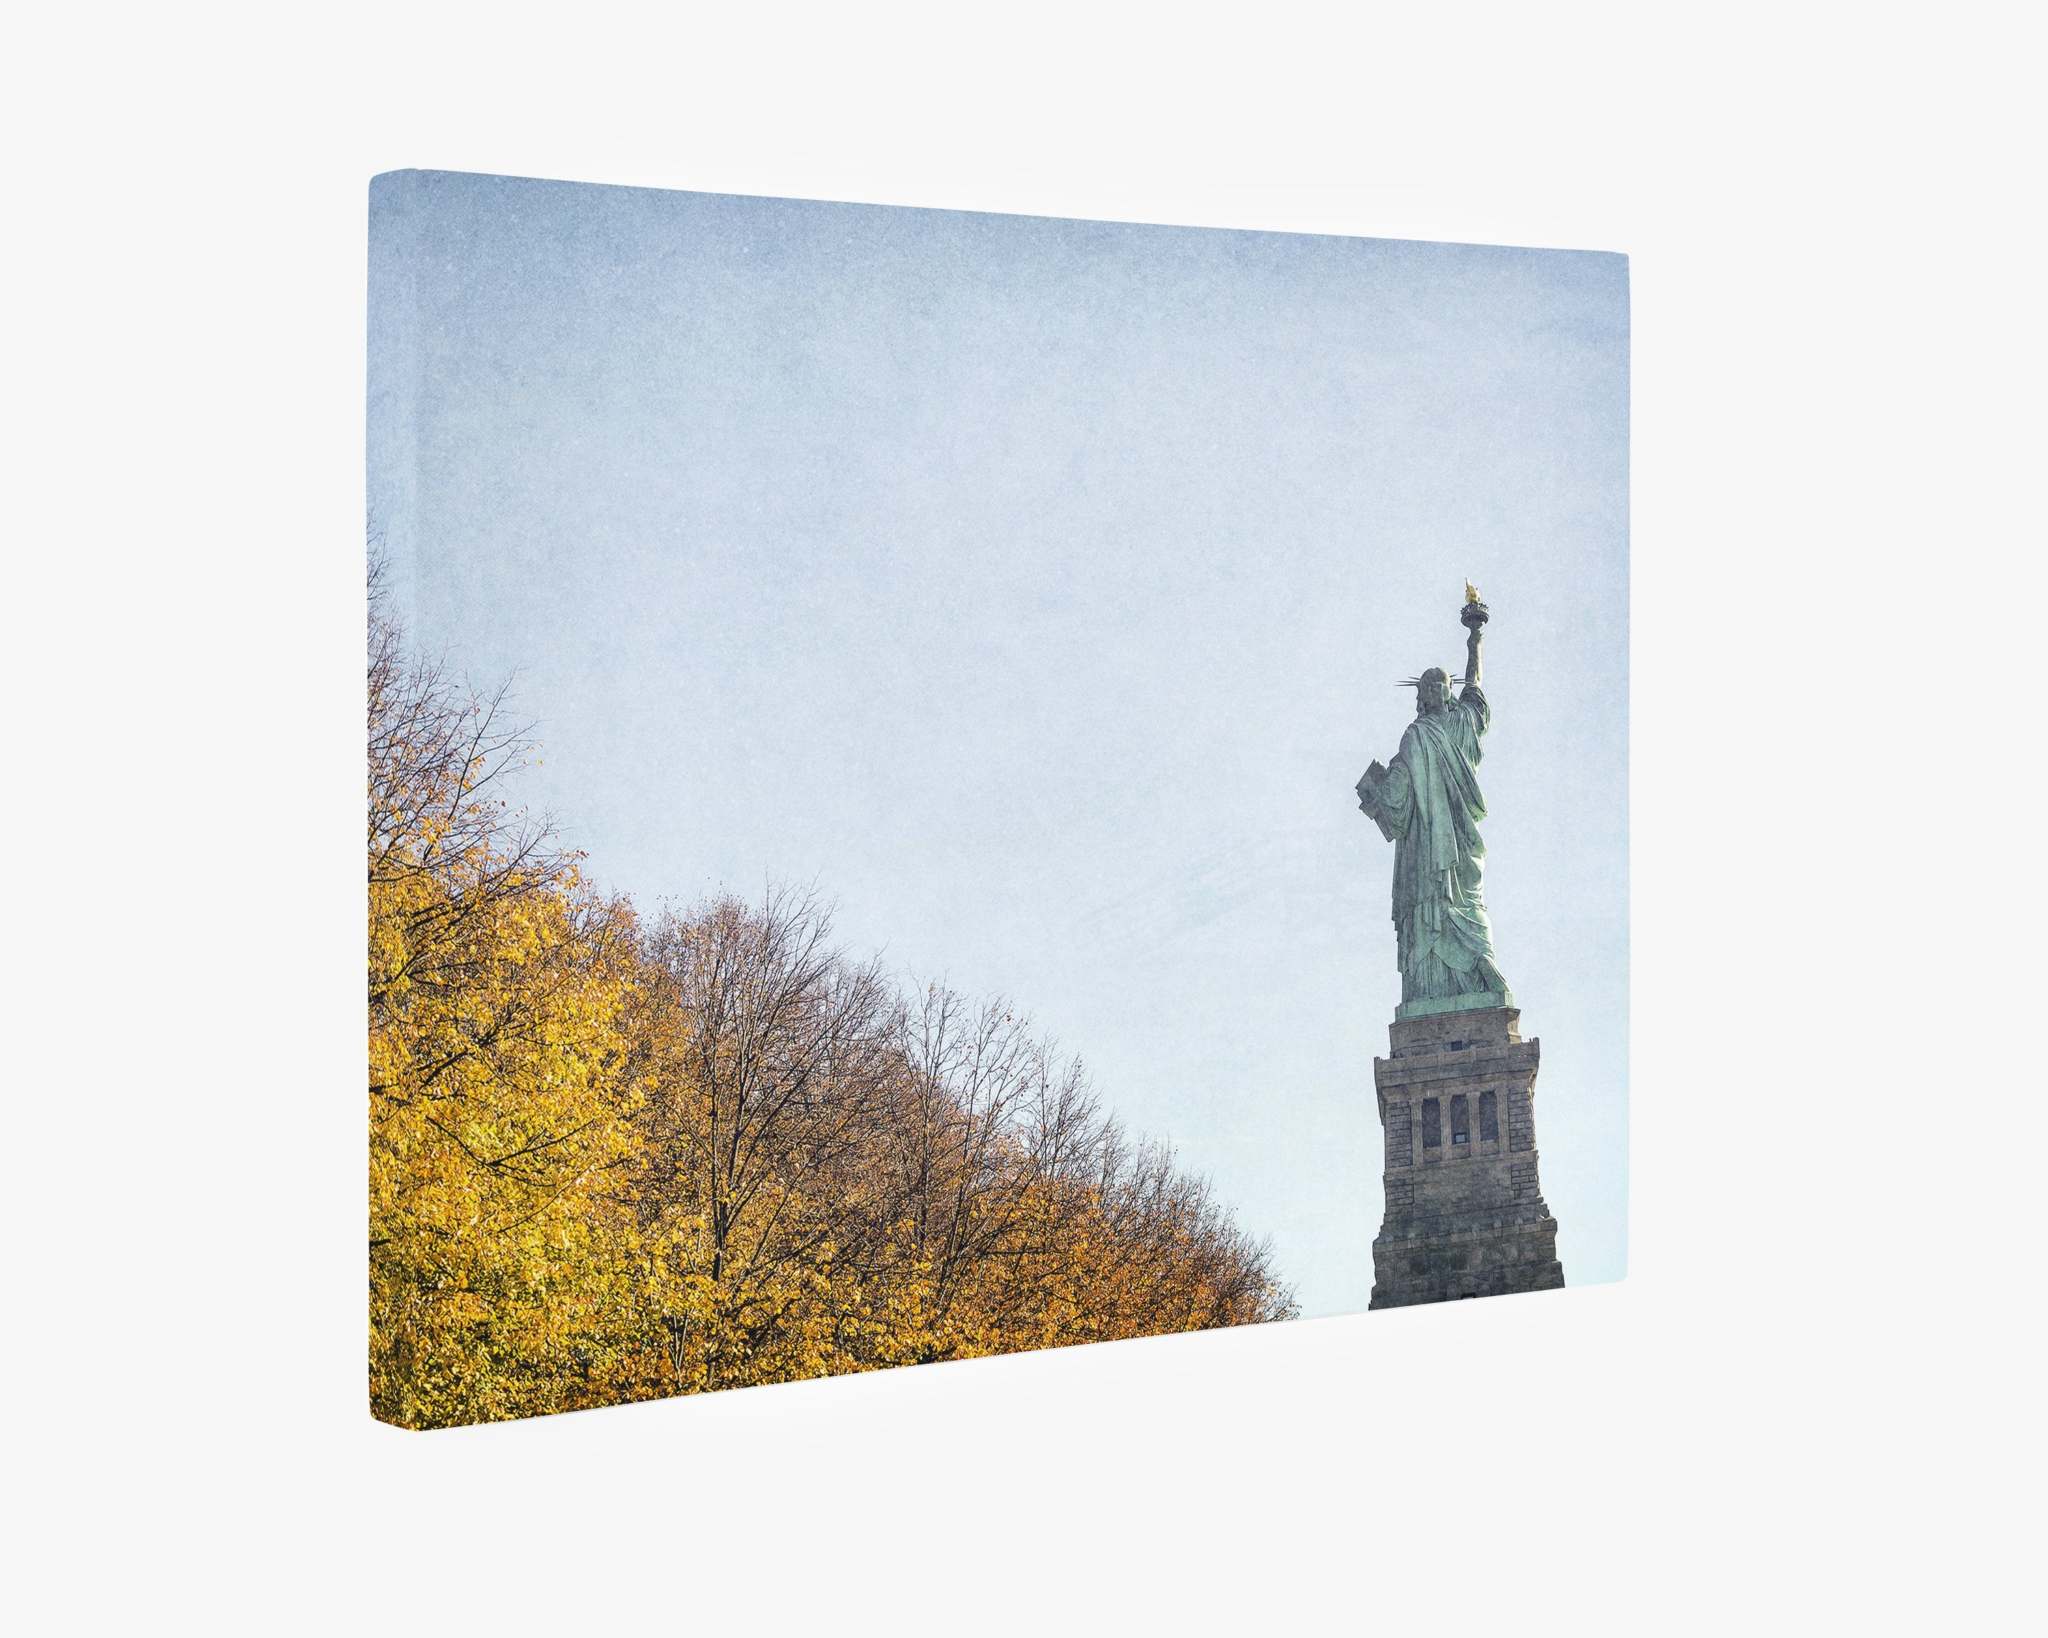 An Offley Green New York City Canvas Wall Art, &#39;Liberty in Fall&#39; is seen from a low angle, with its iconic torch raised in her right hand. To the left, leafless trees with yellow foliage are visible under a clear blue sky, all rendered on premium artist-grade canvas.